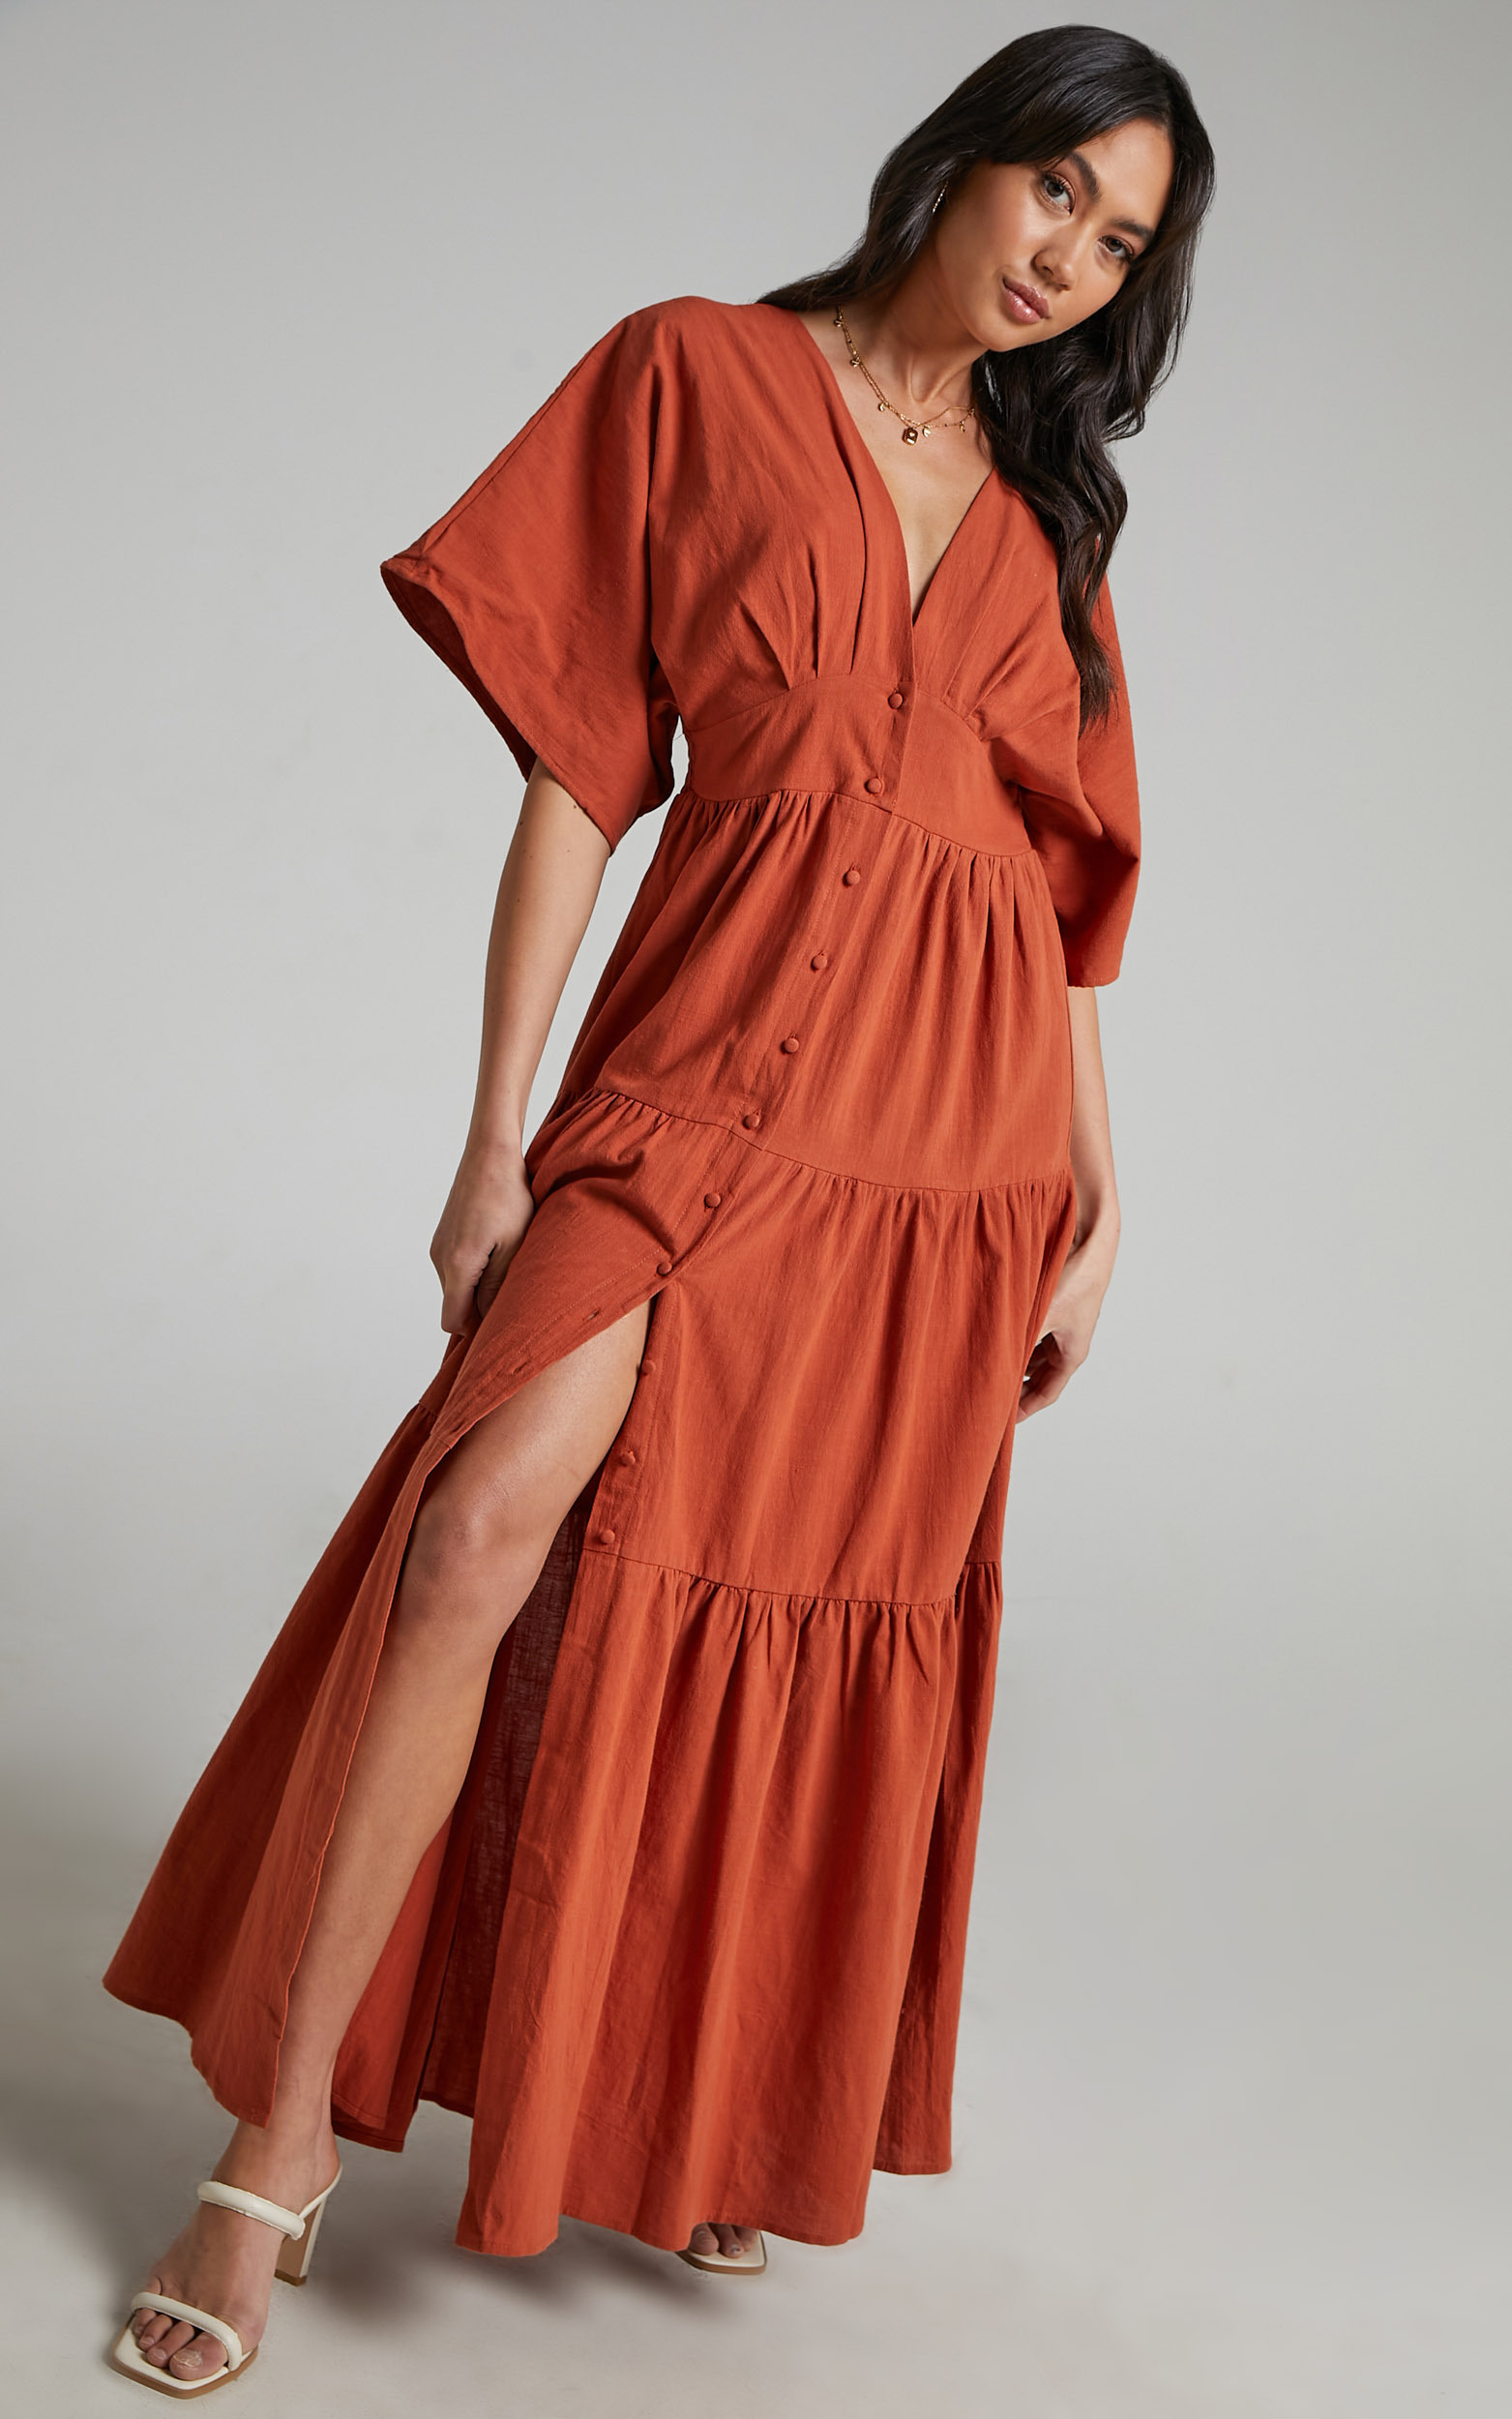 Louvain Tiered Maxi Dress in Rust - 06, BRN1, hi-res image number null